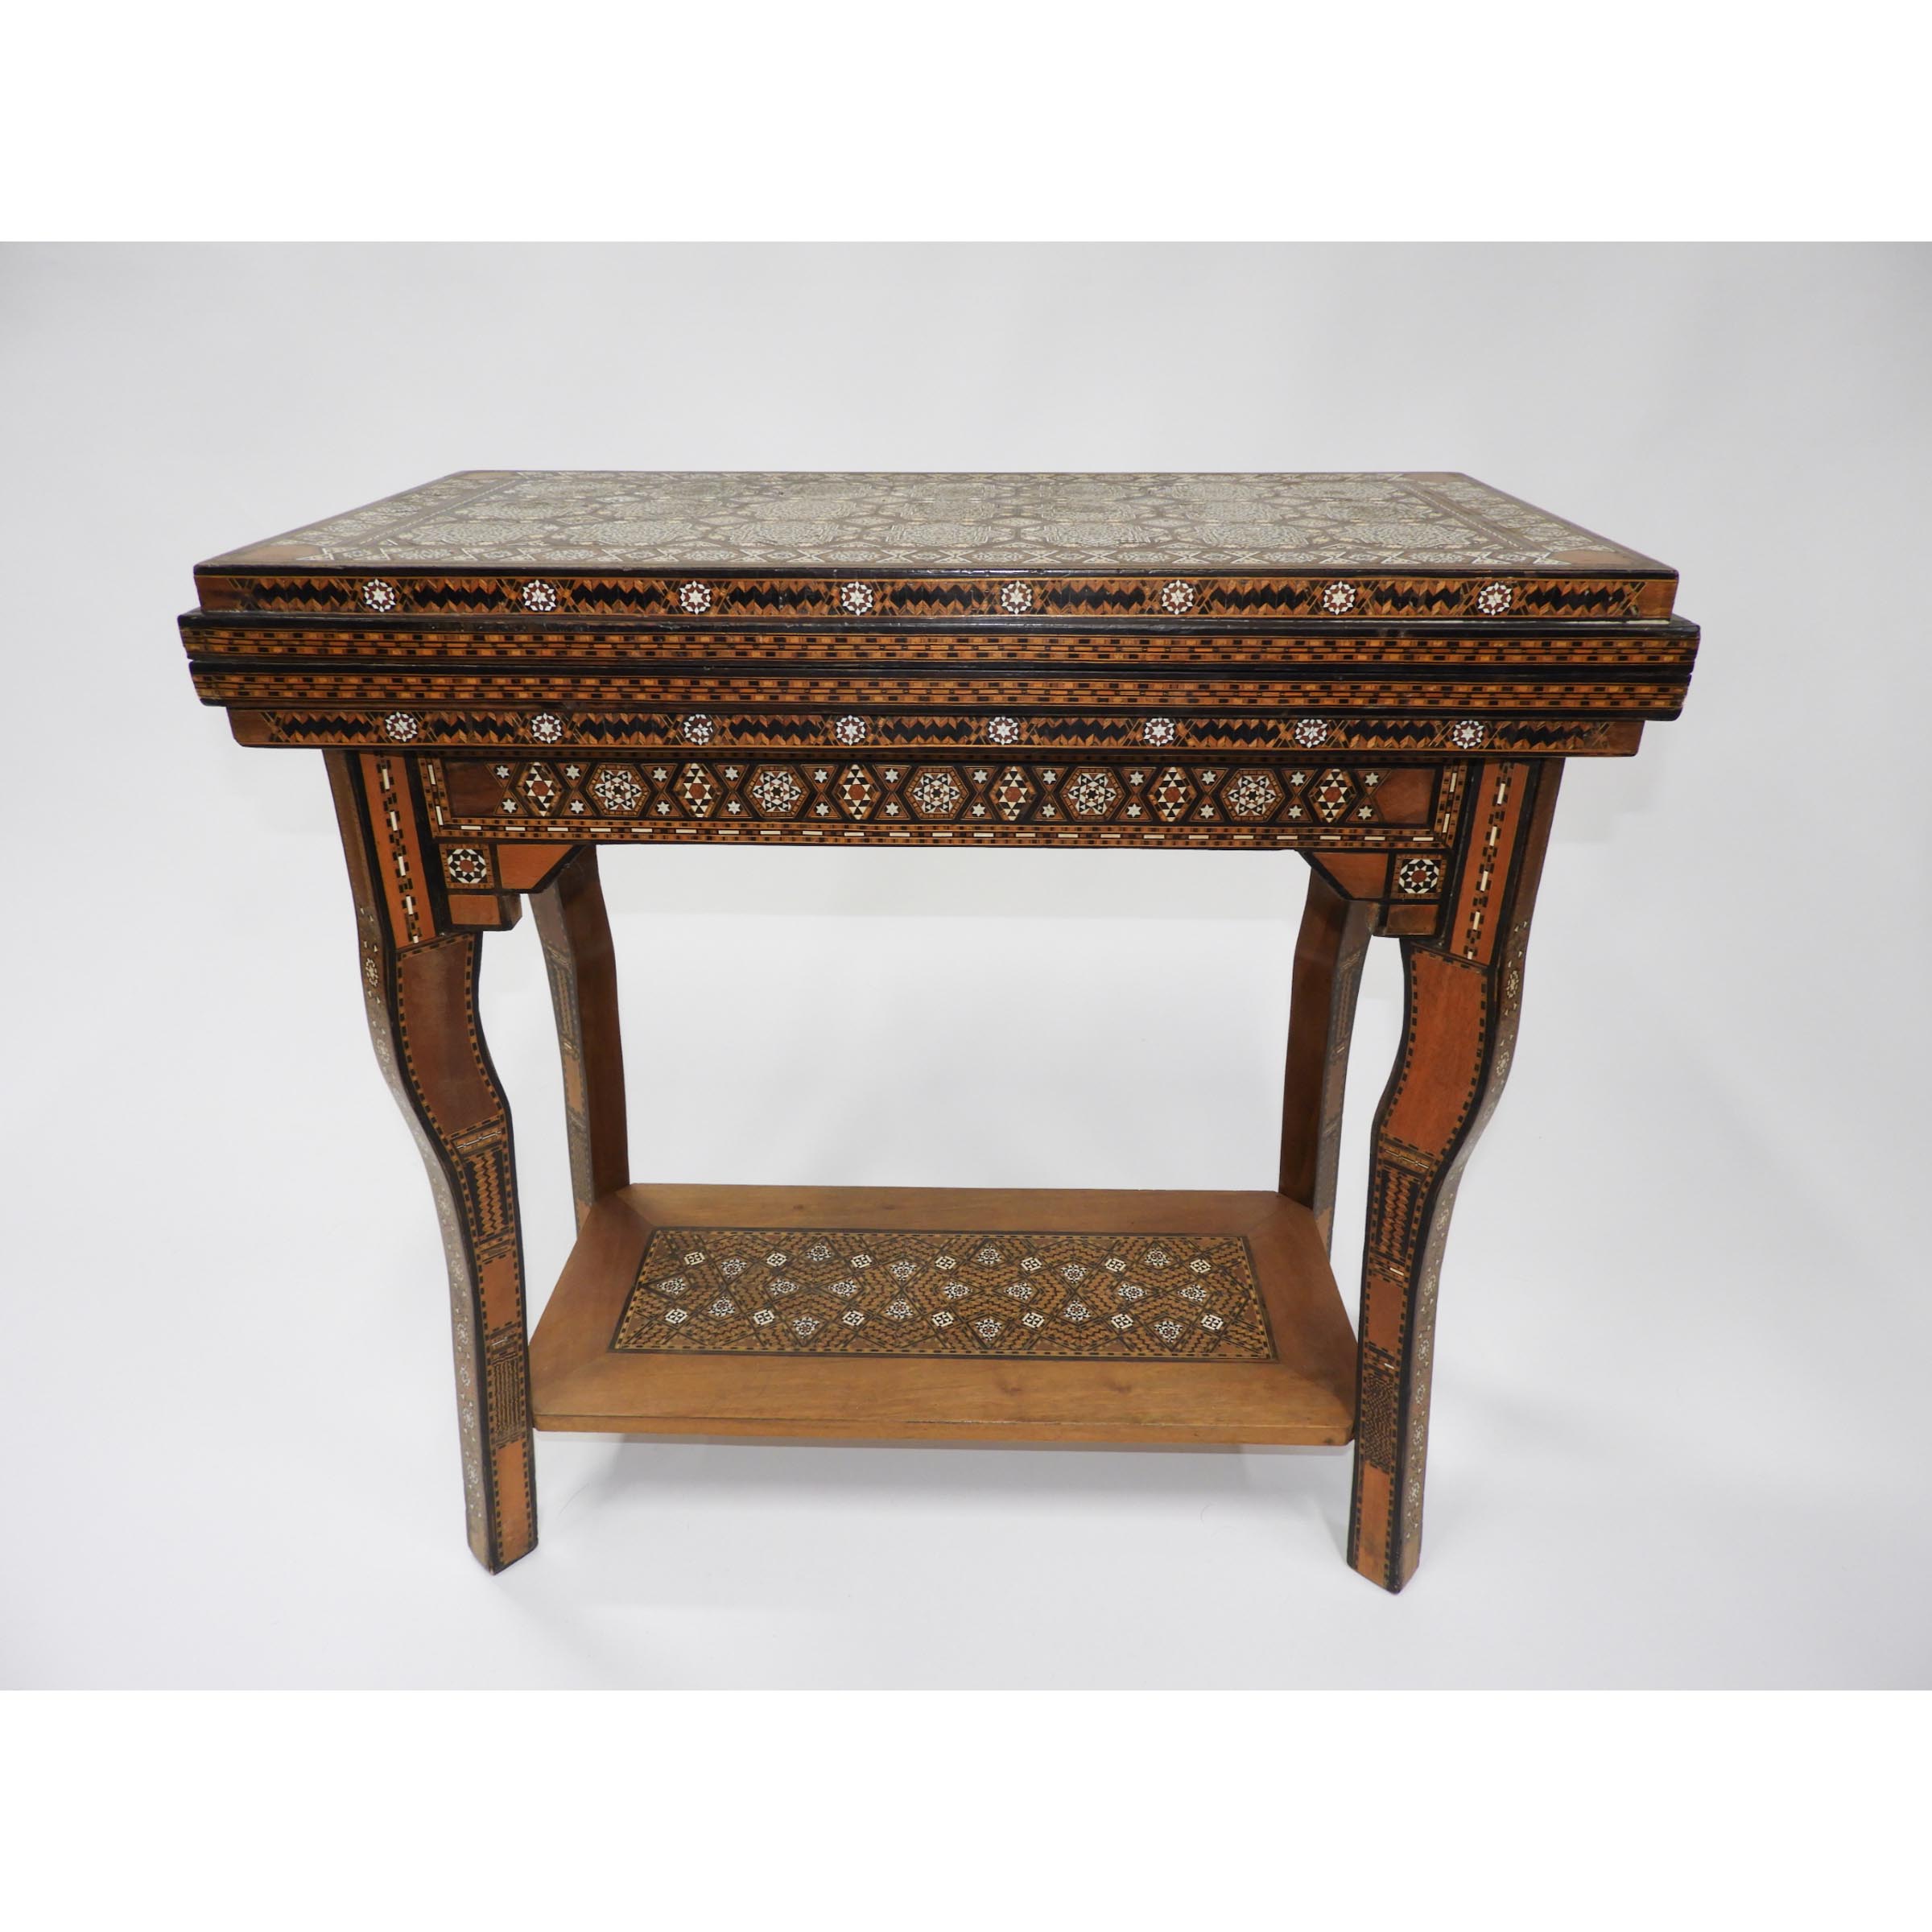 Syrian Inlaid Games Table mid 20th 3abaa8